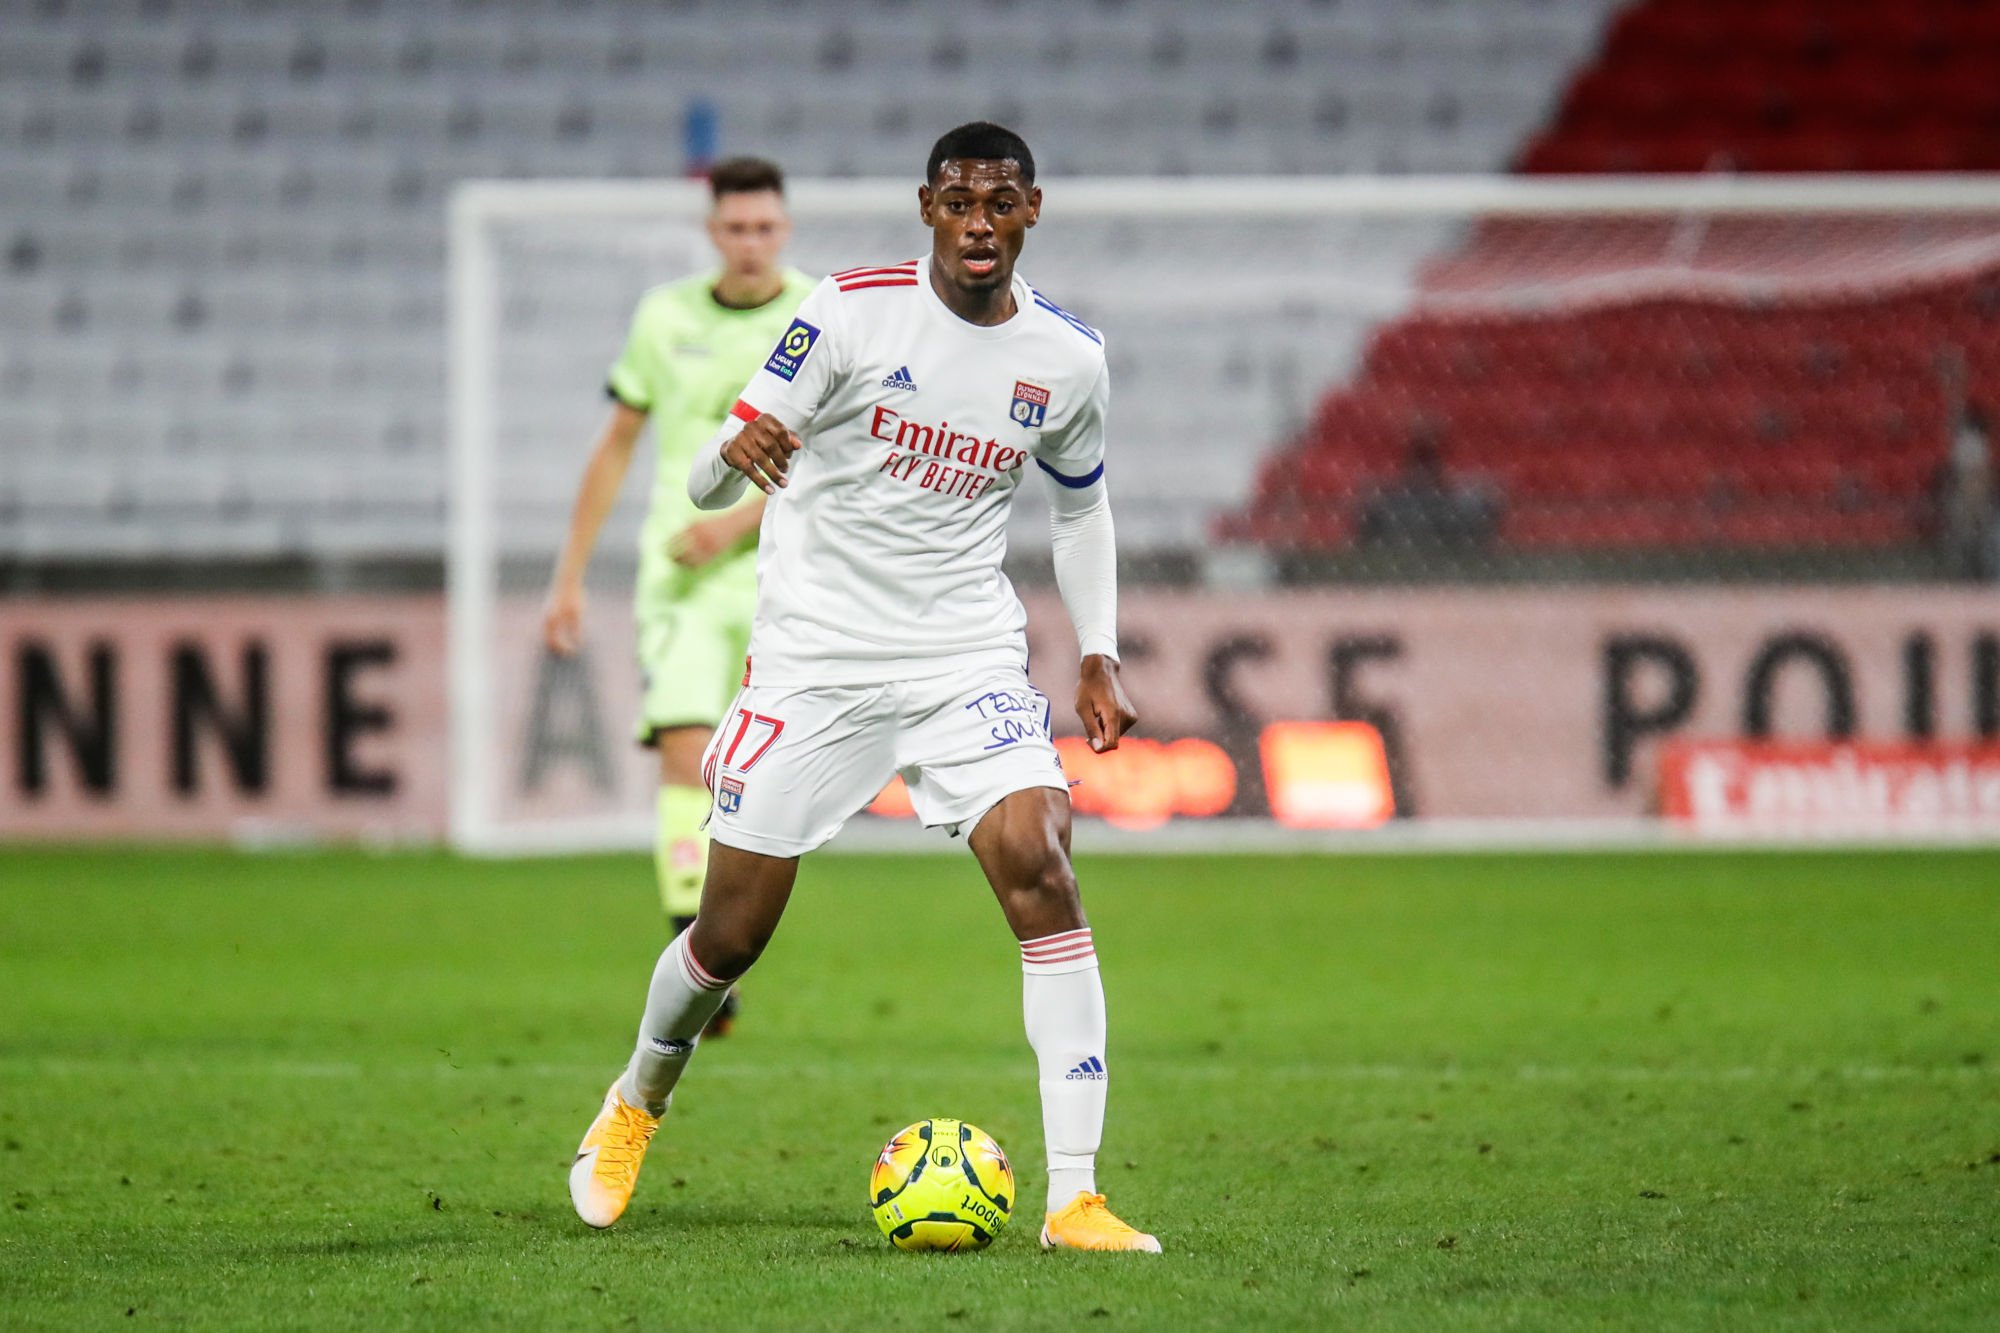 Jeff REINE ADELAIDE of Lyon during the Ligue 1 match between Olympique lyonnais vs Dijon at Groupama Stadium, Lyon, France on August 28, 2020.  (Photo by Romain Biard/Icon Sport) - Jeff REINE ADELAIDE - Groupama Stadium - Lyon (France)